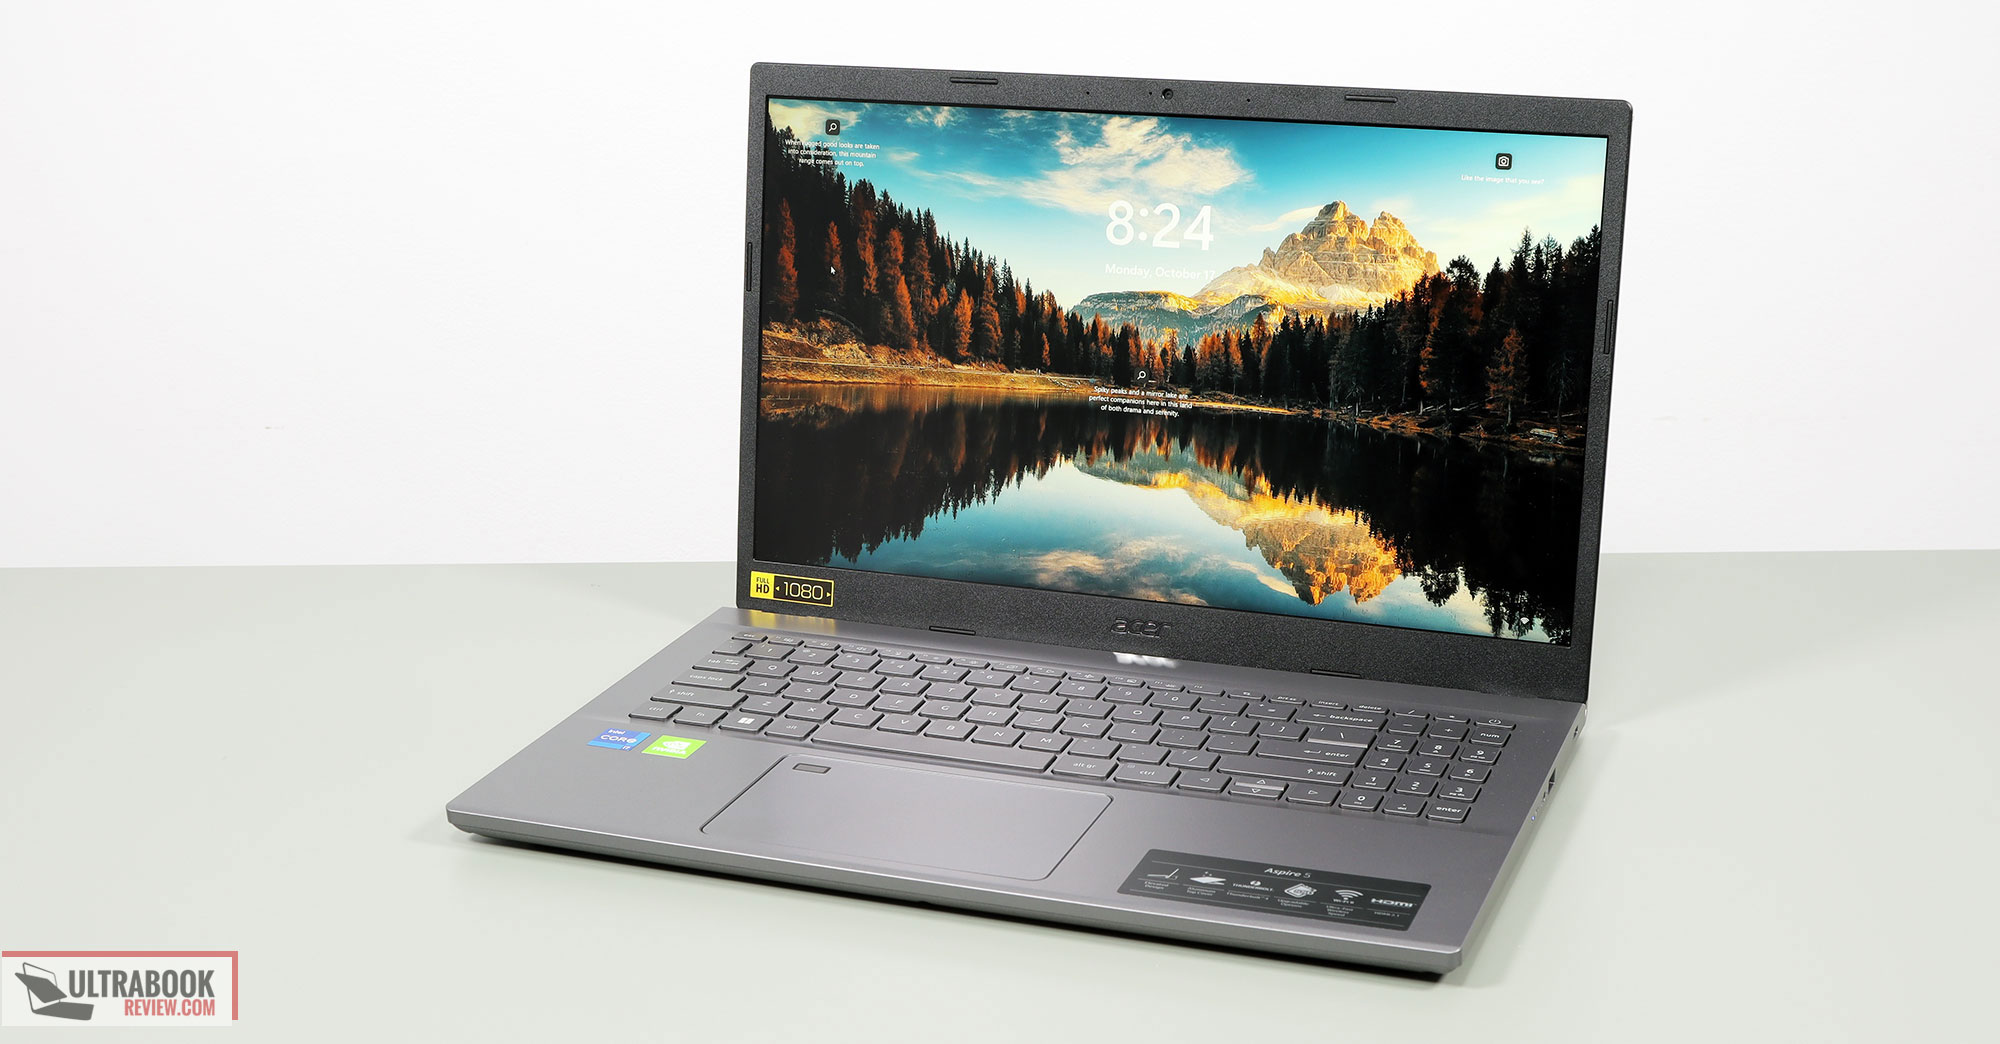 Acer Aspire 5 A515-56 review: An otherwise solid budget PC ruined